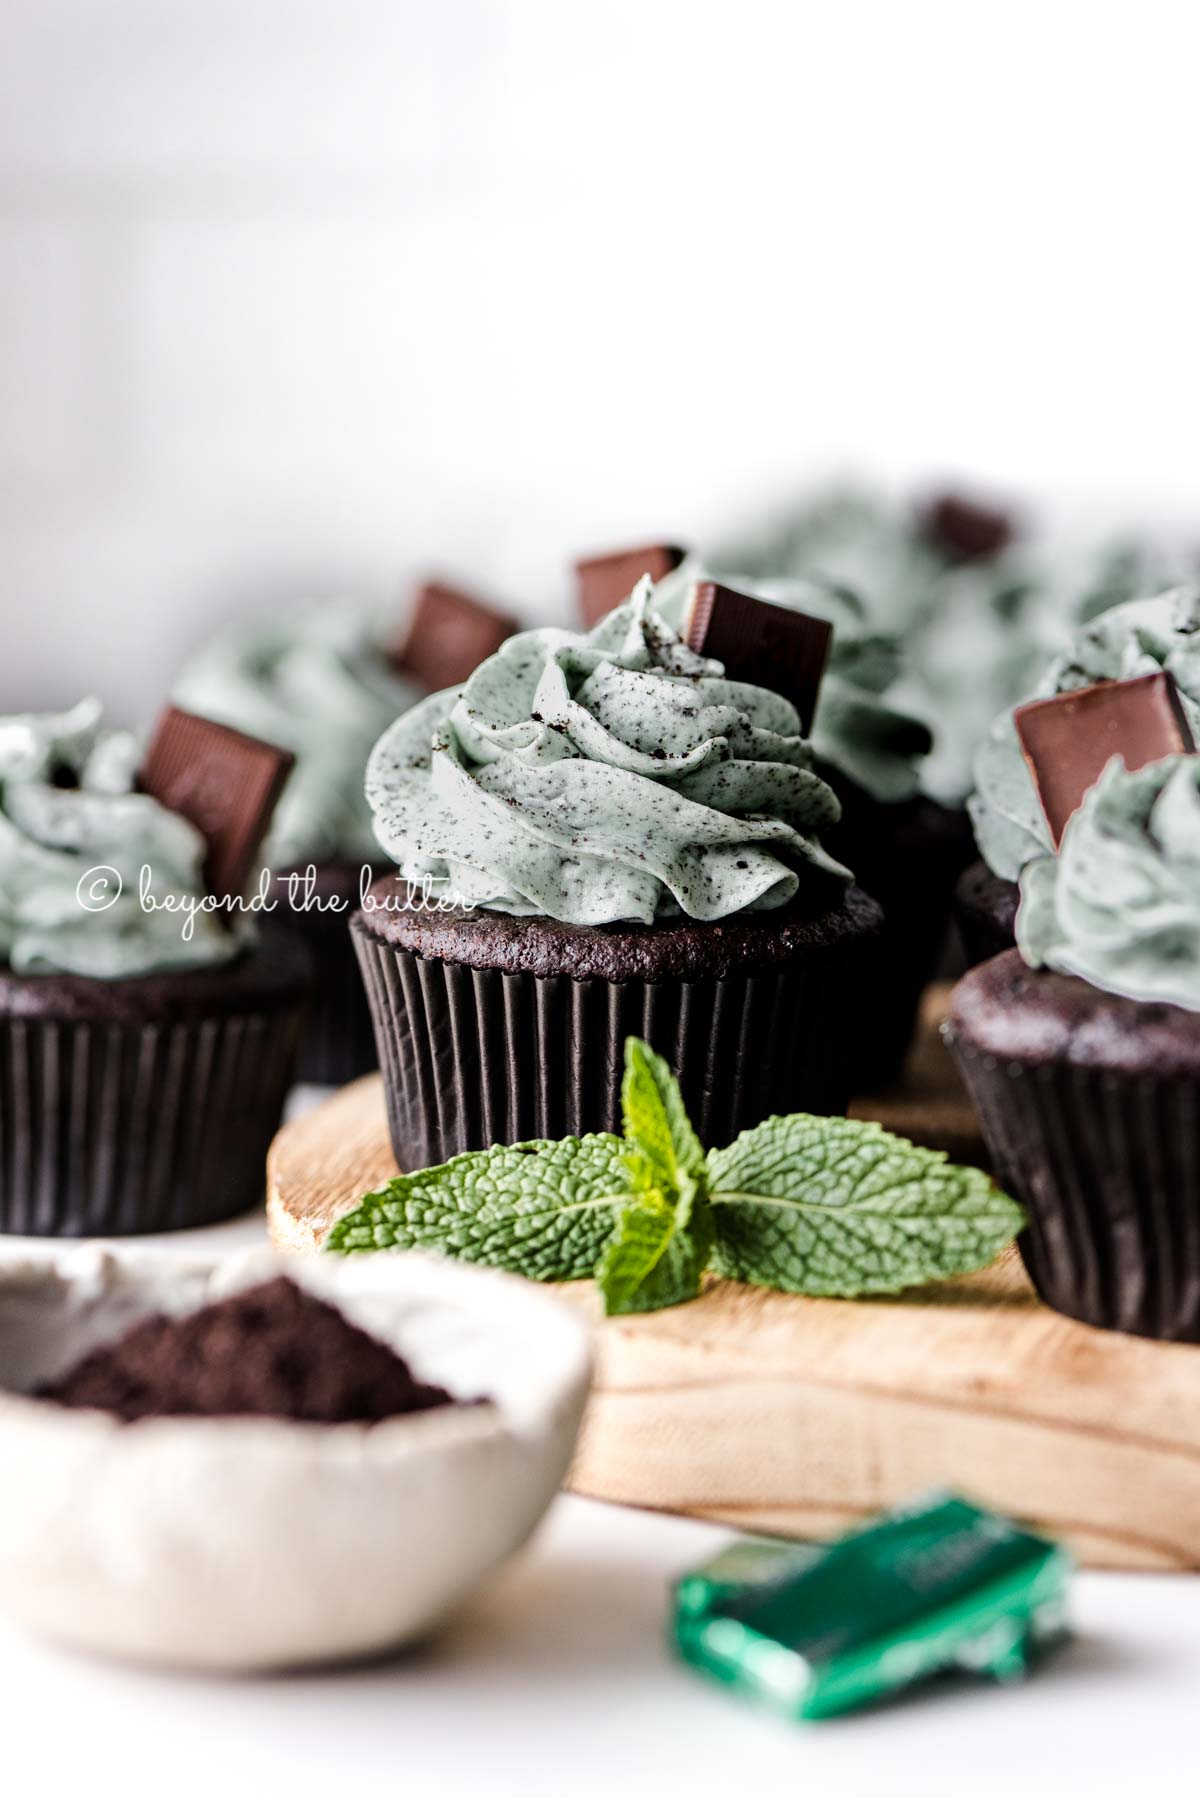 Mint chocolate cupcakes on a wood circular tray with mint leaves as decoration | All Images © Beyond the Butter®